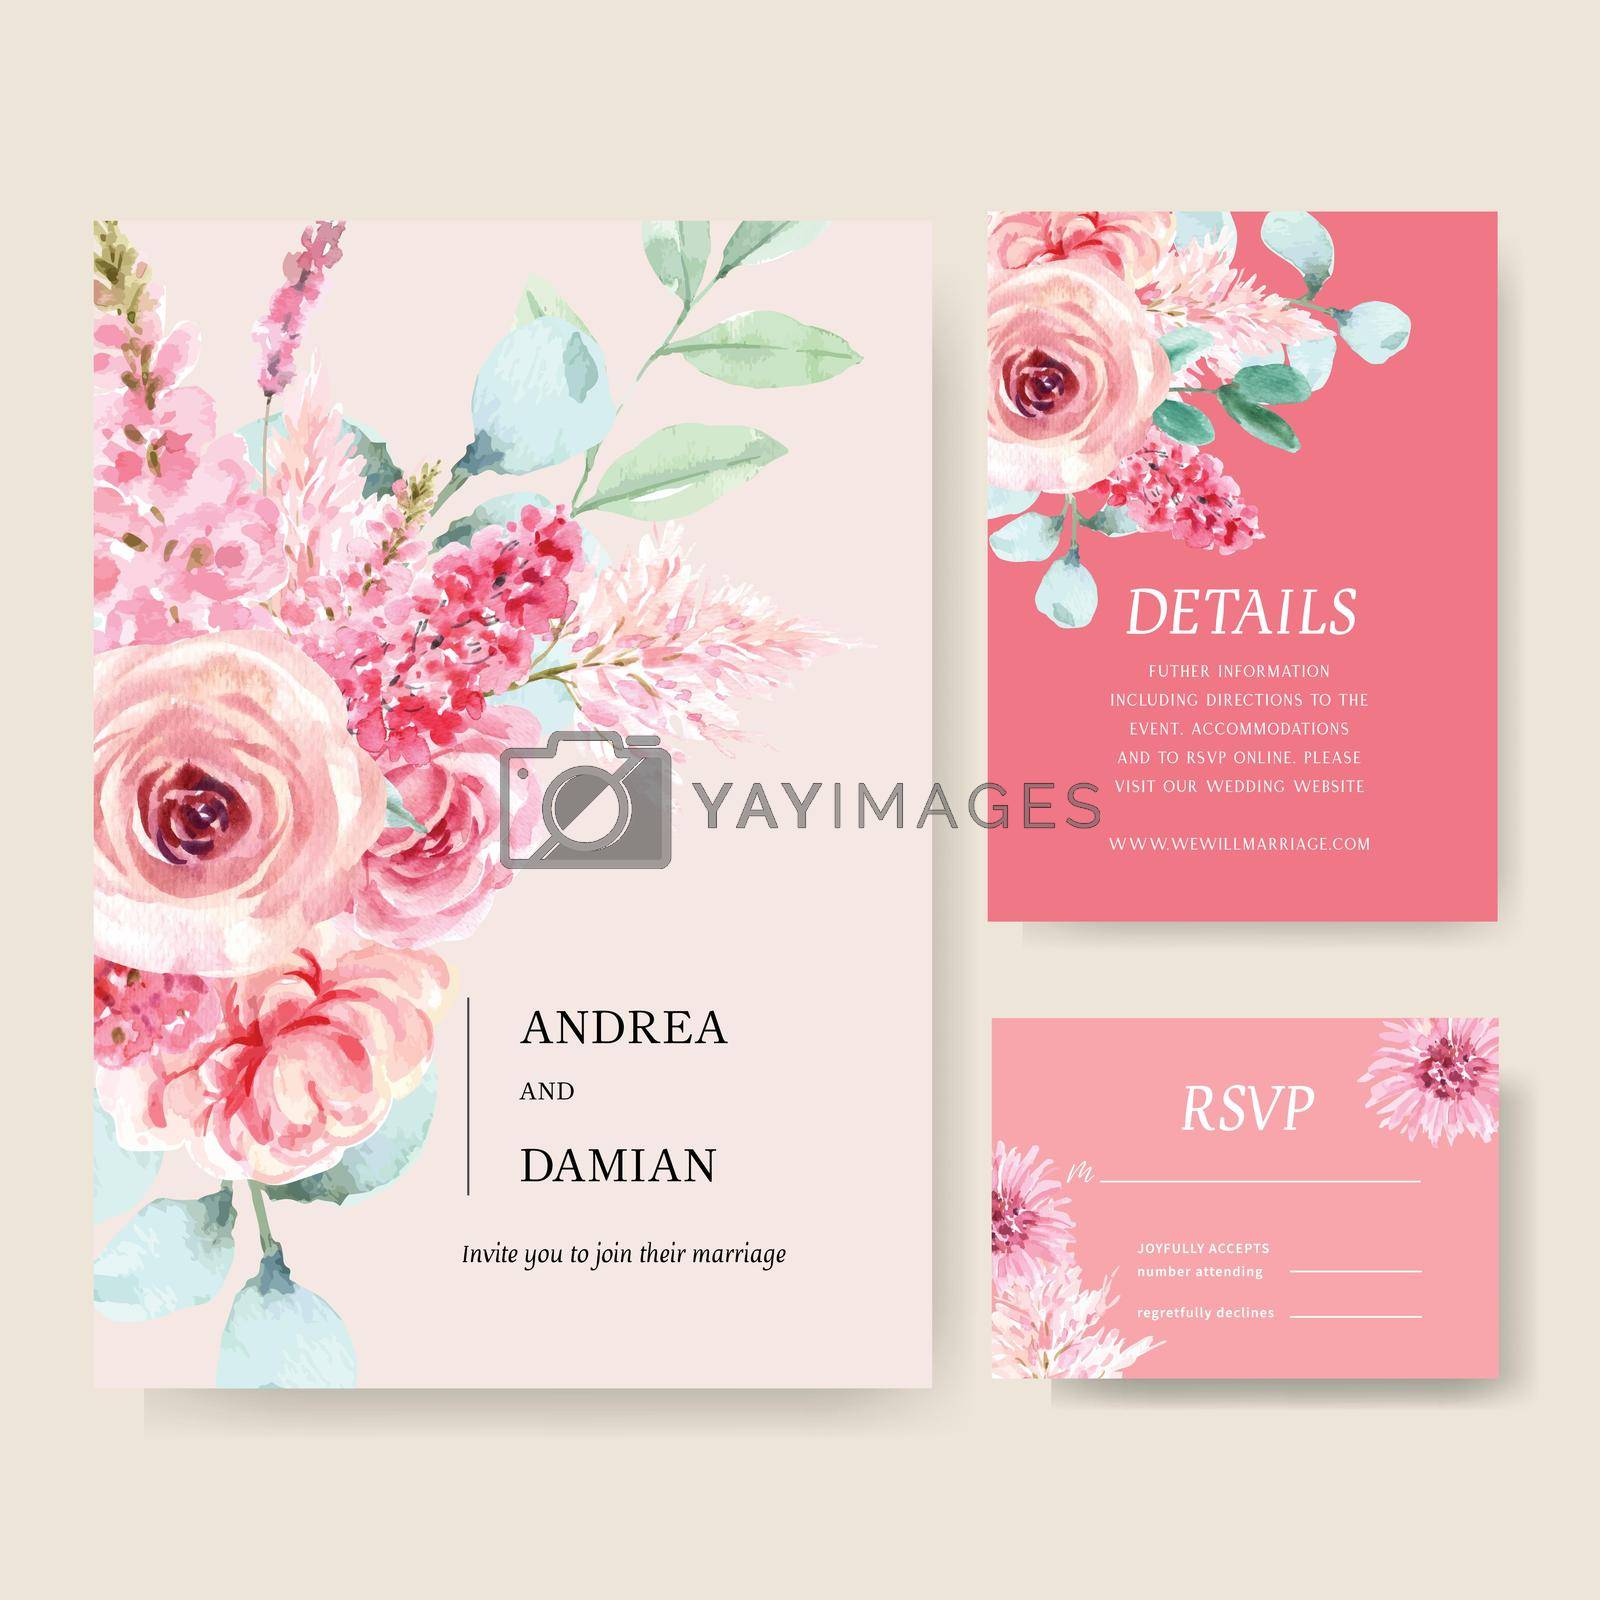 Royalty free image of Wedding card design with vintage floral, creative watercolor peony, rose illustration. by Photographeeasia